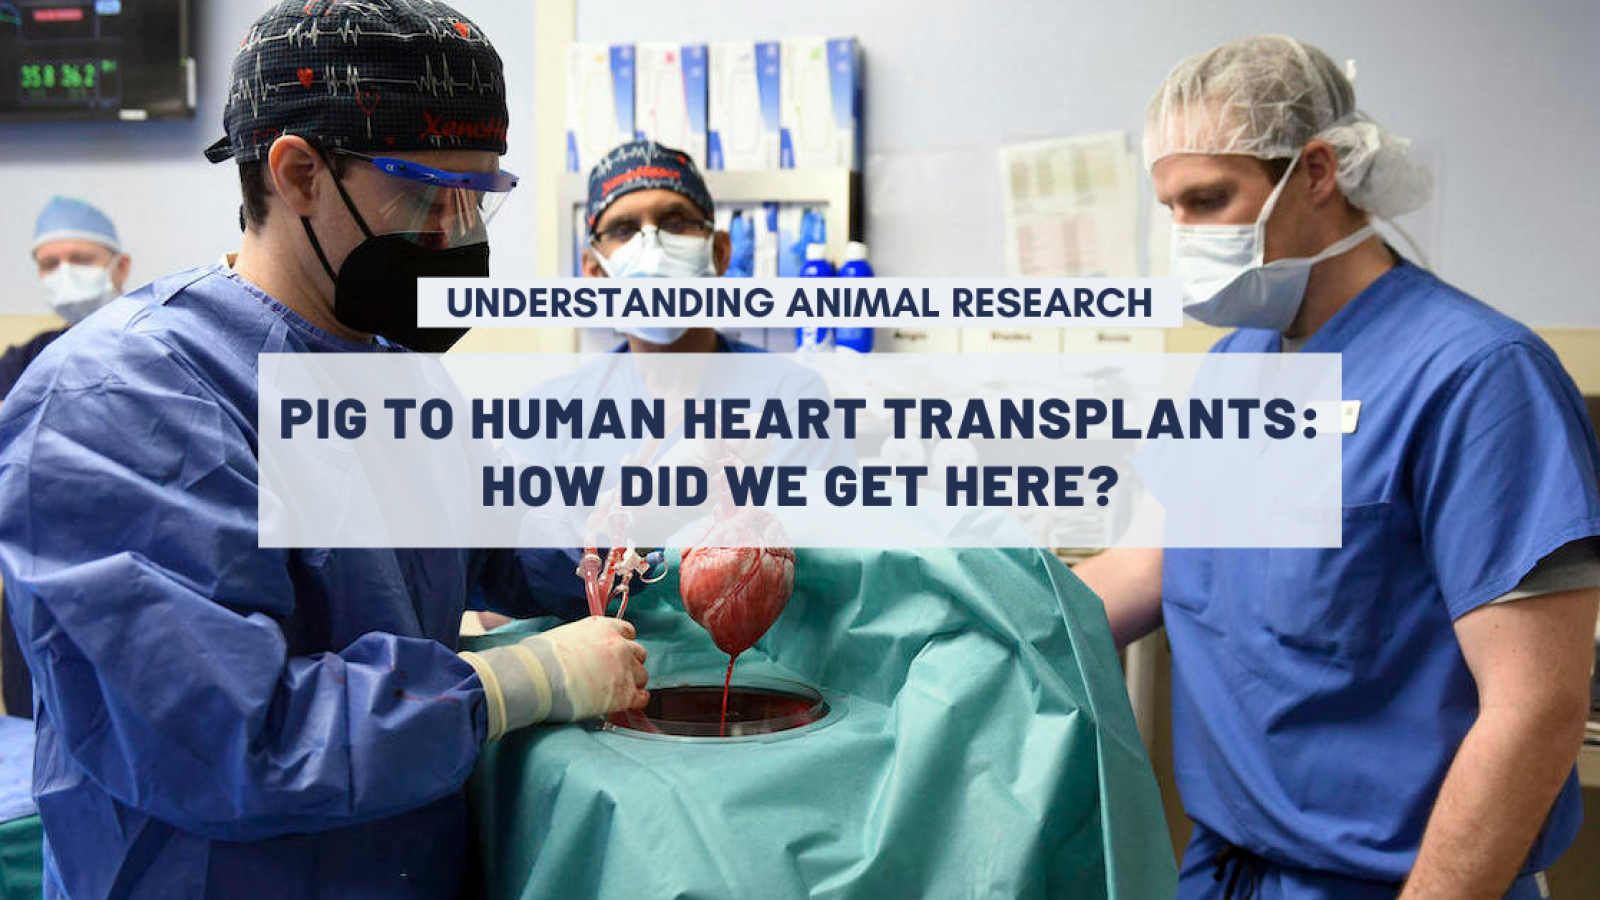 Pig to human heart transplants: how did we get here?